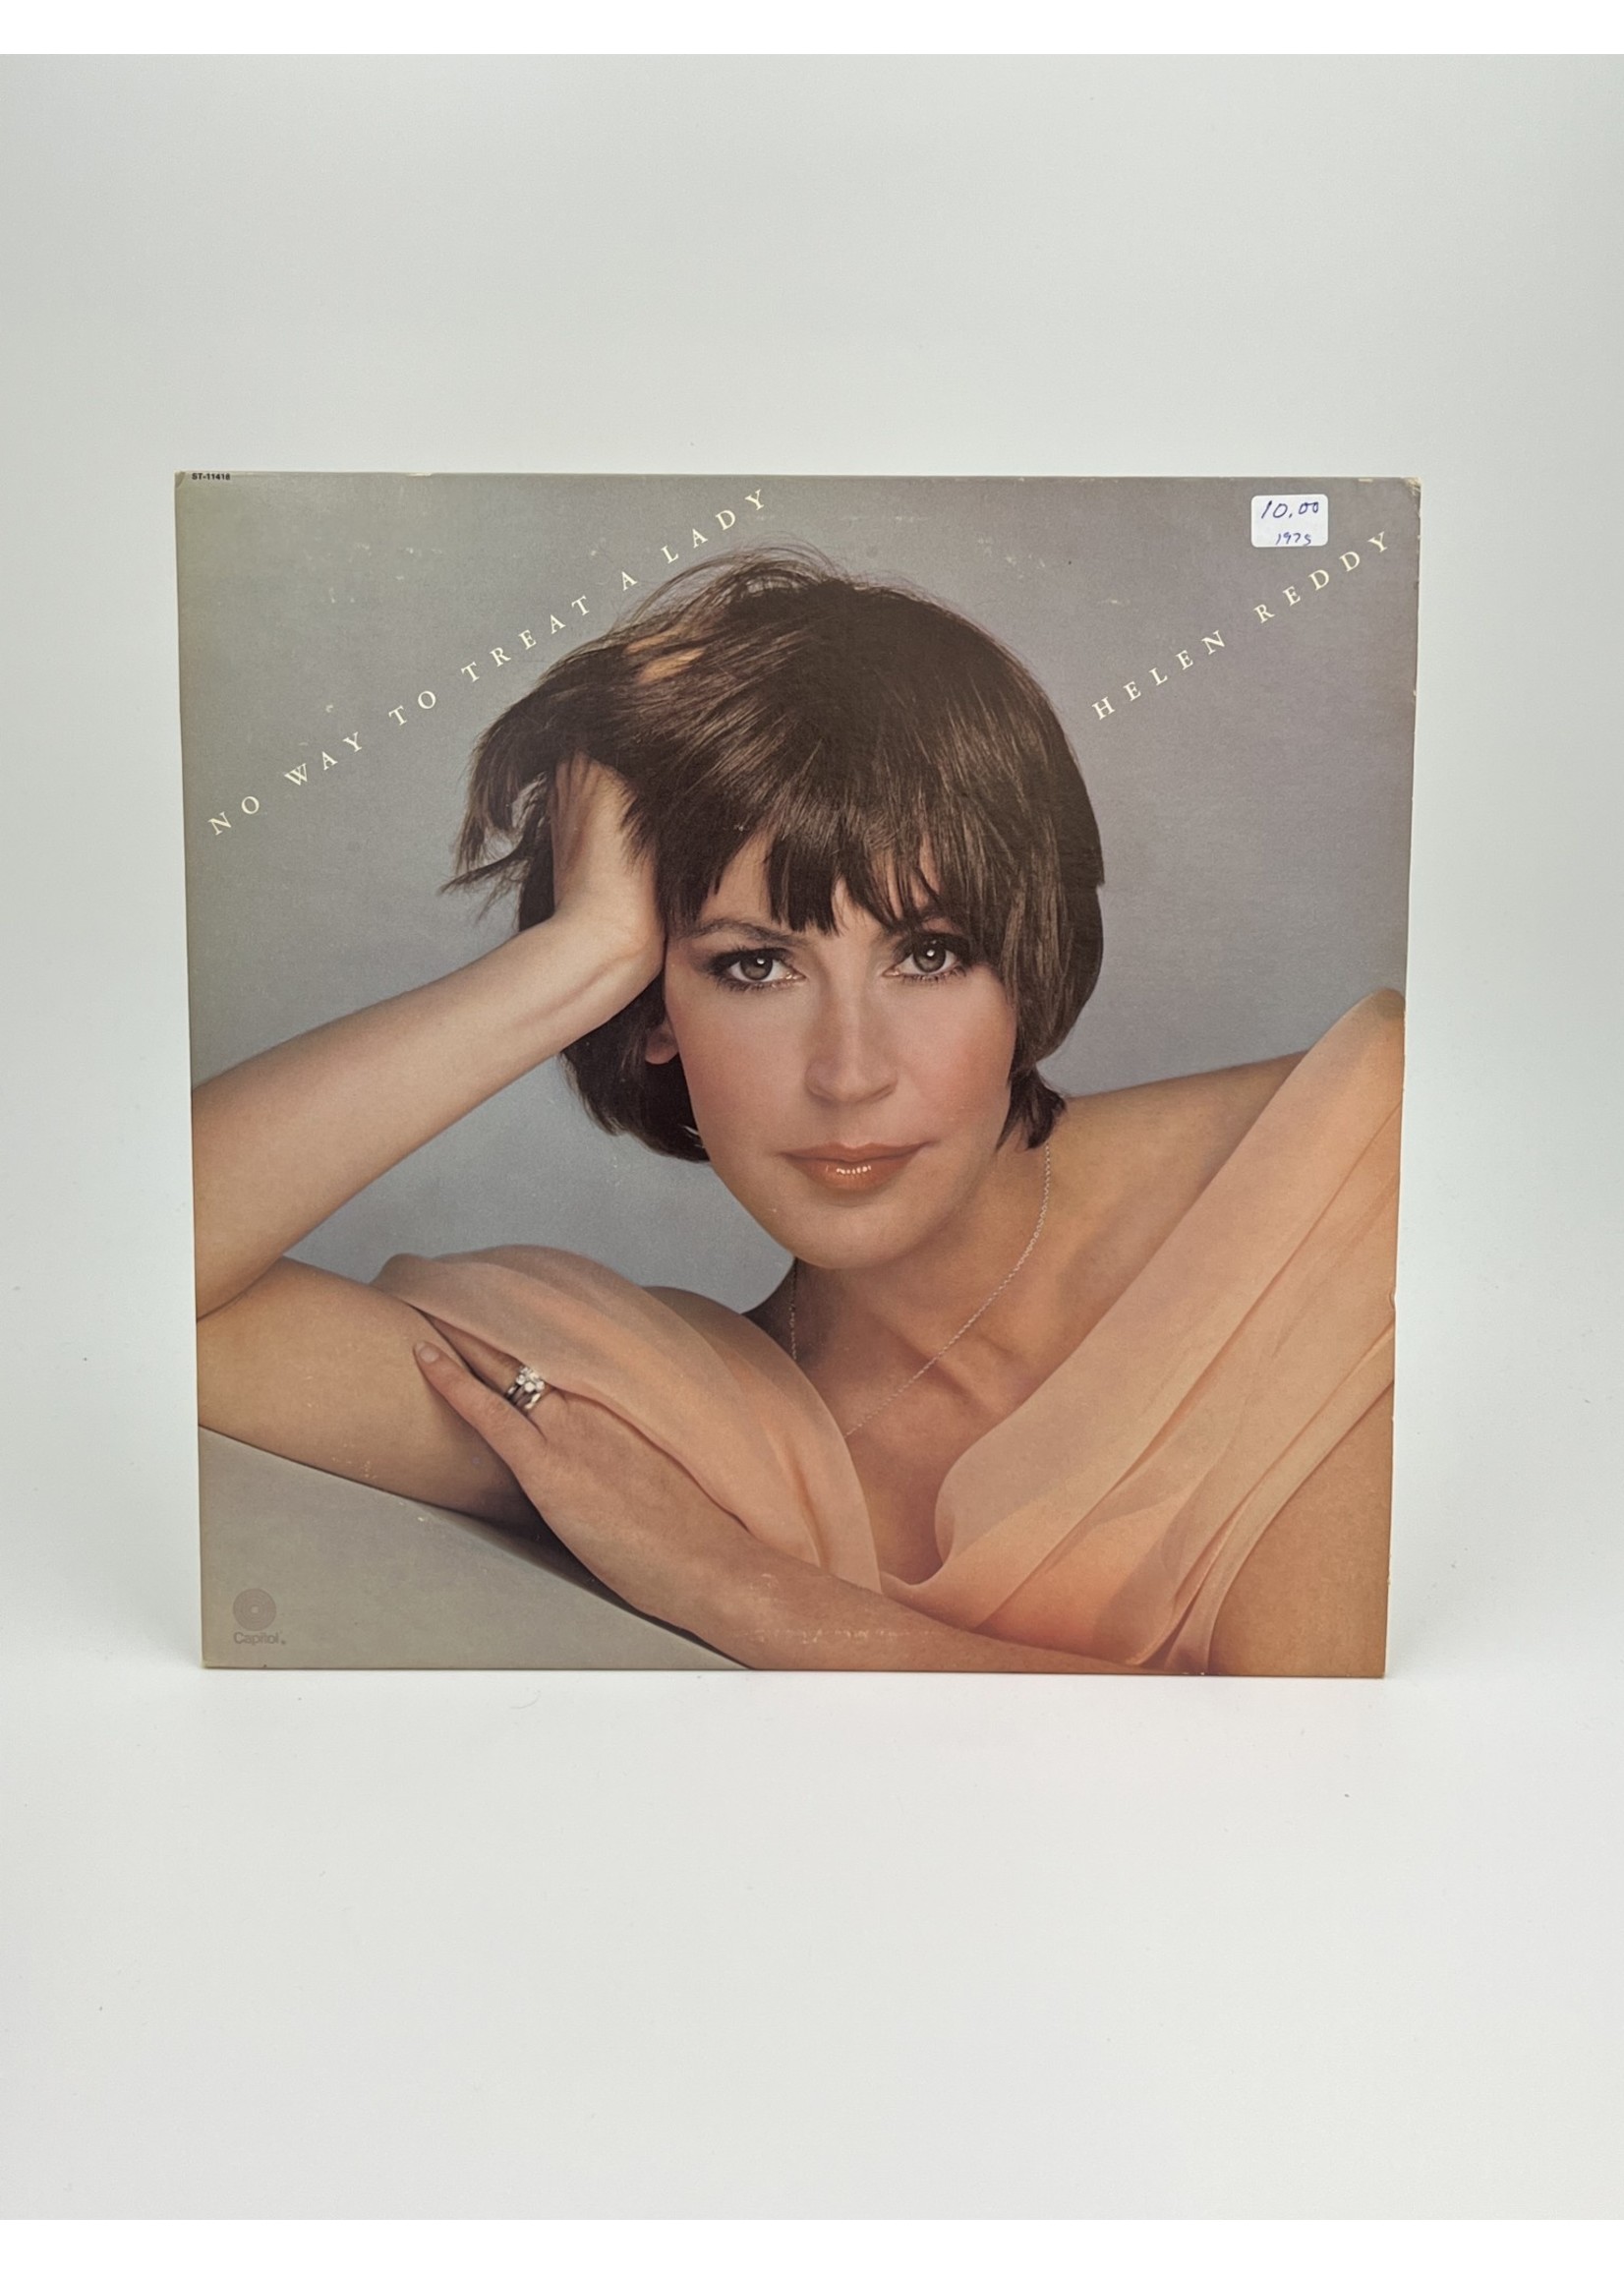 LP Helen Reddy No Way To Treat A Lady LP Record